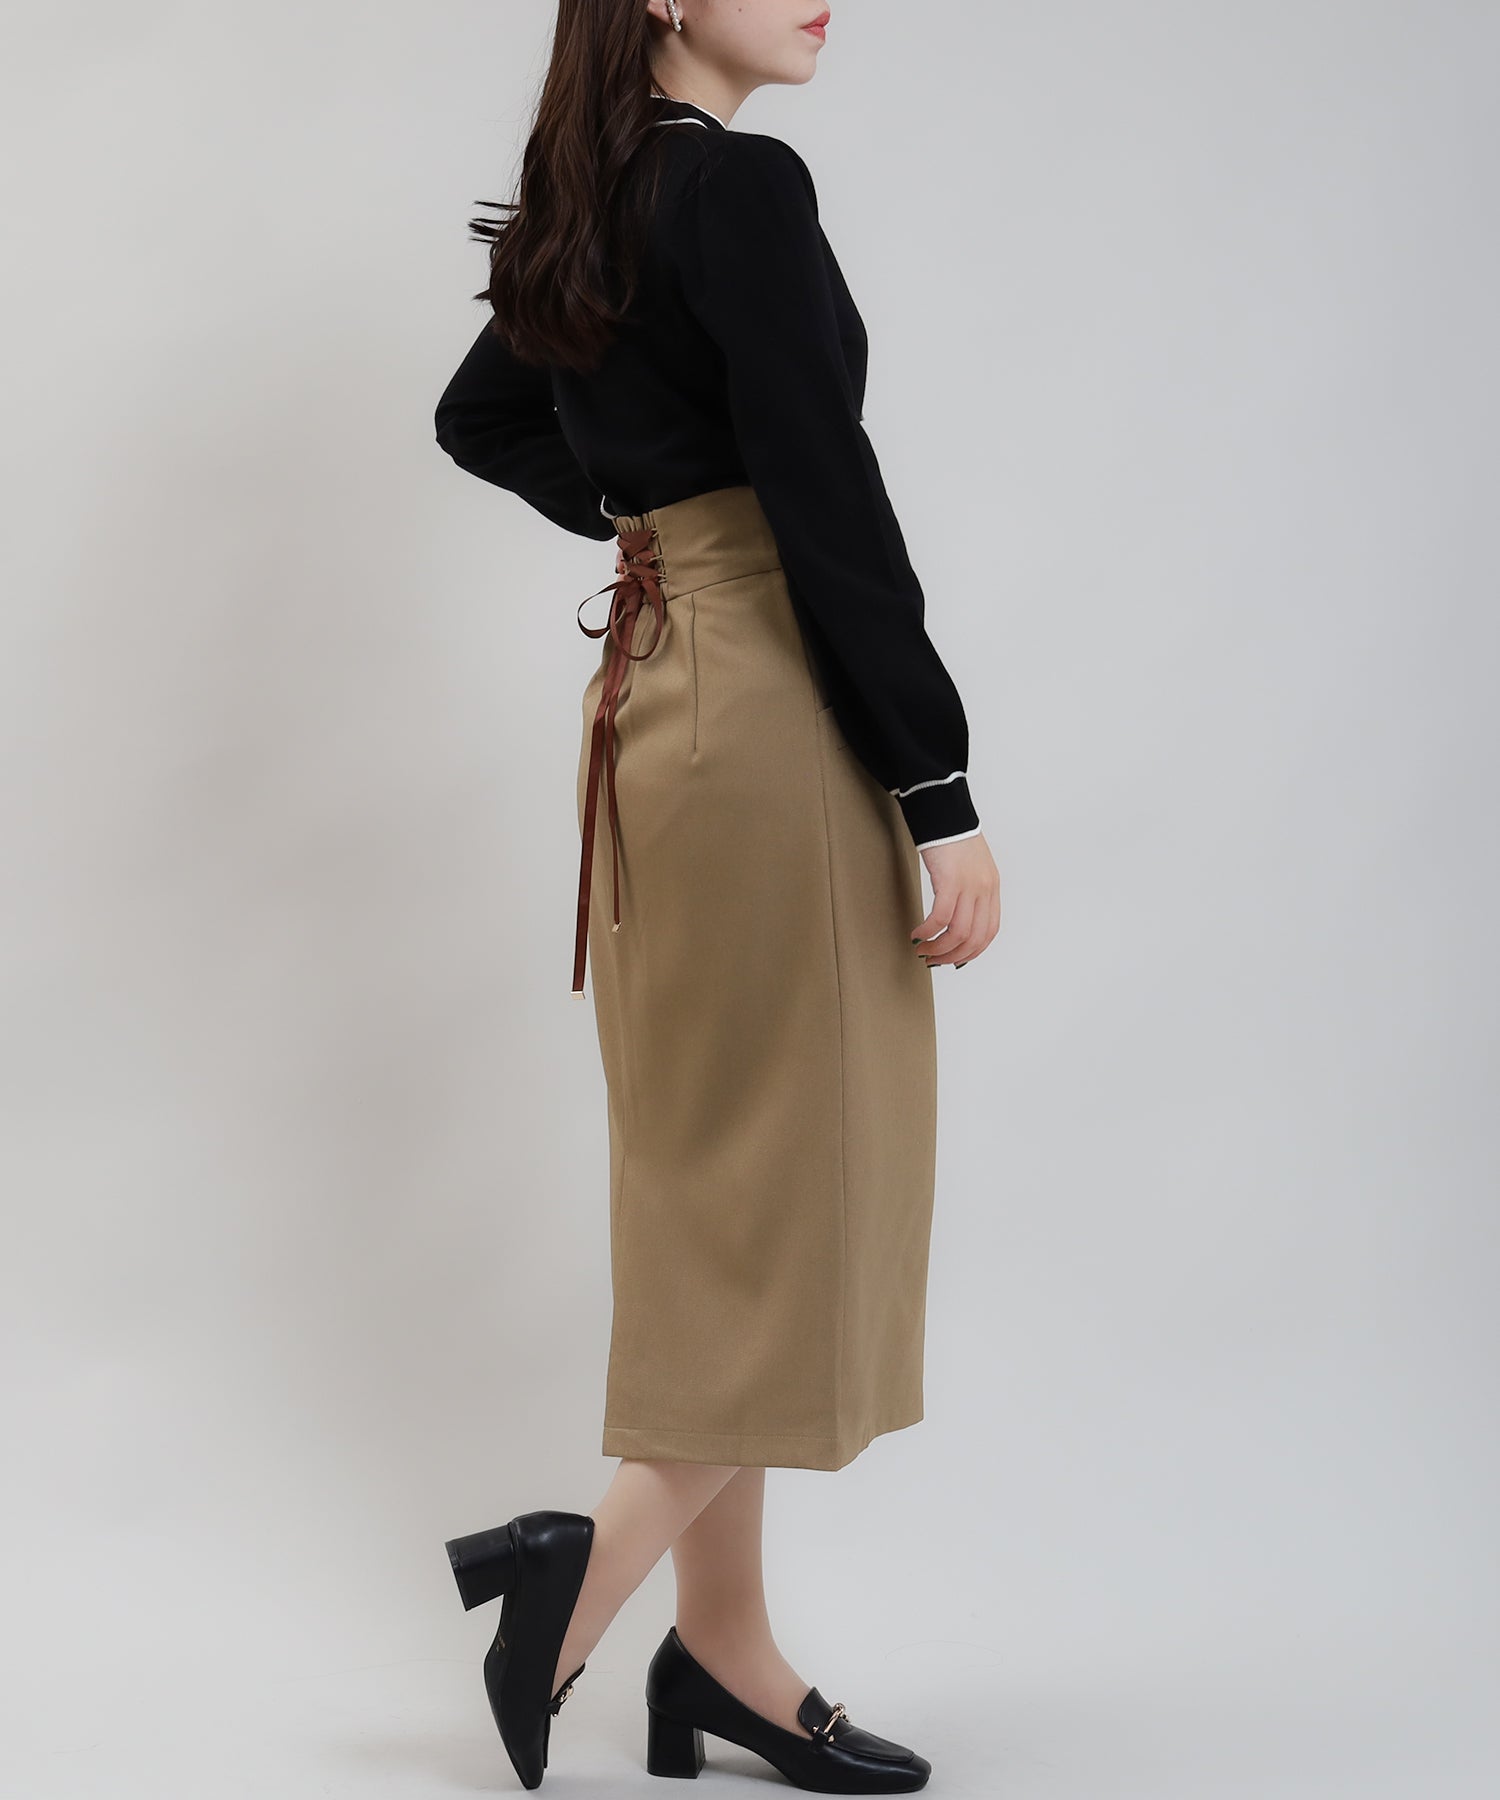 back spindle tight skirt